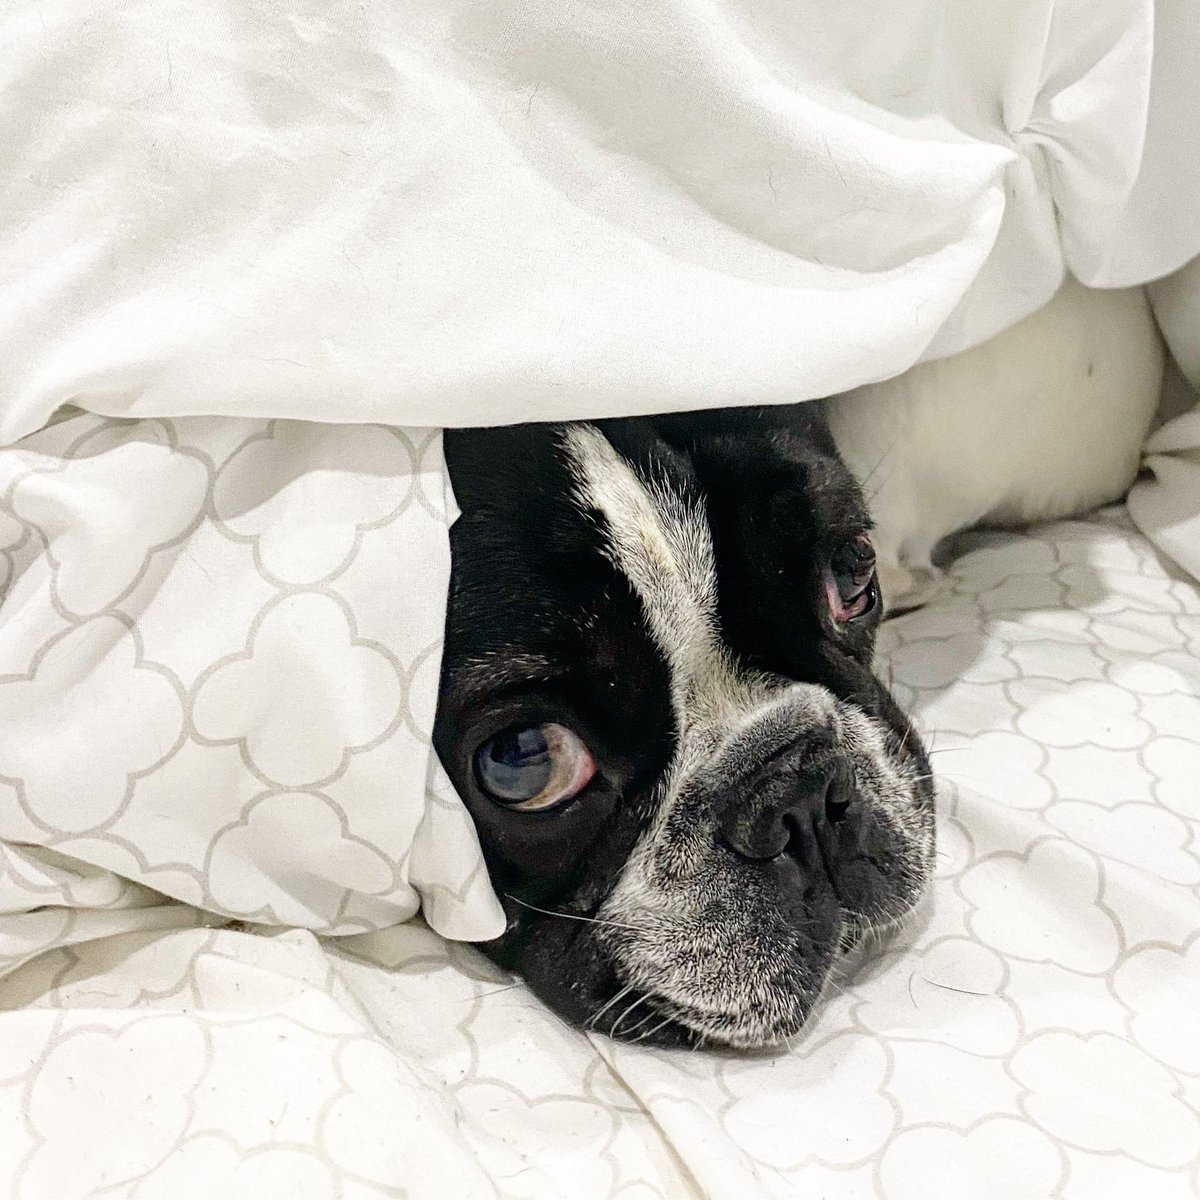 🚫Do Not Disturb🚫

#frenchiesociety
#yourdailyfrenchies
#frenchiefanatics
#frenchiesquad
#frenchieworld
#piedfrenchie
#cutefrenchie
#frenchiedaily
#happyfrenchies
#frenchiefever
#frenchiepost
#squishyfacecrew
#mydogiscutest
#dogs_of_world
#dog_features
#frenchstagram